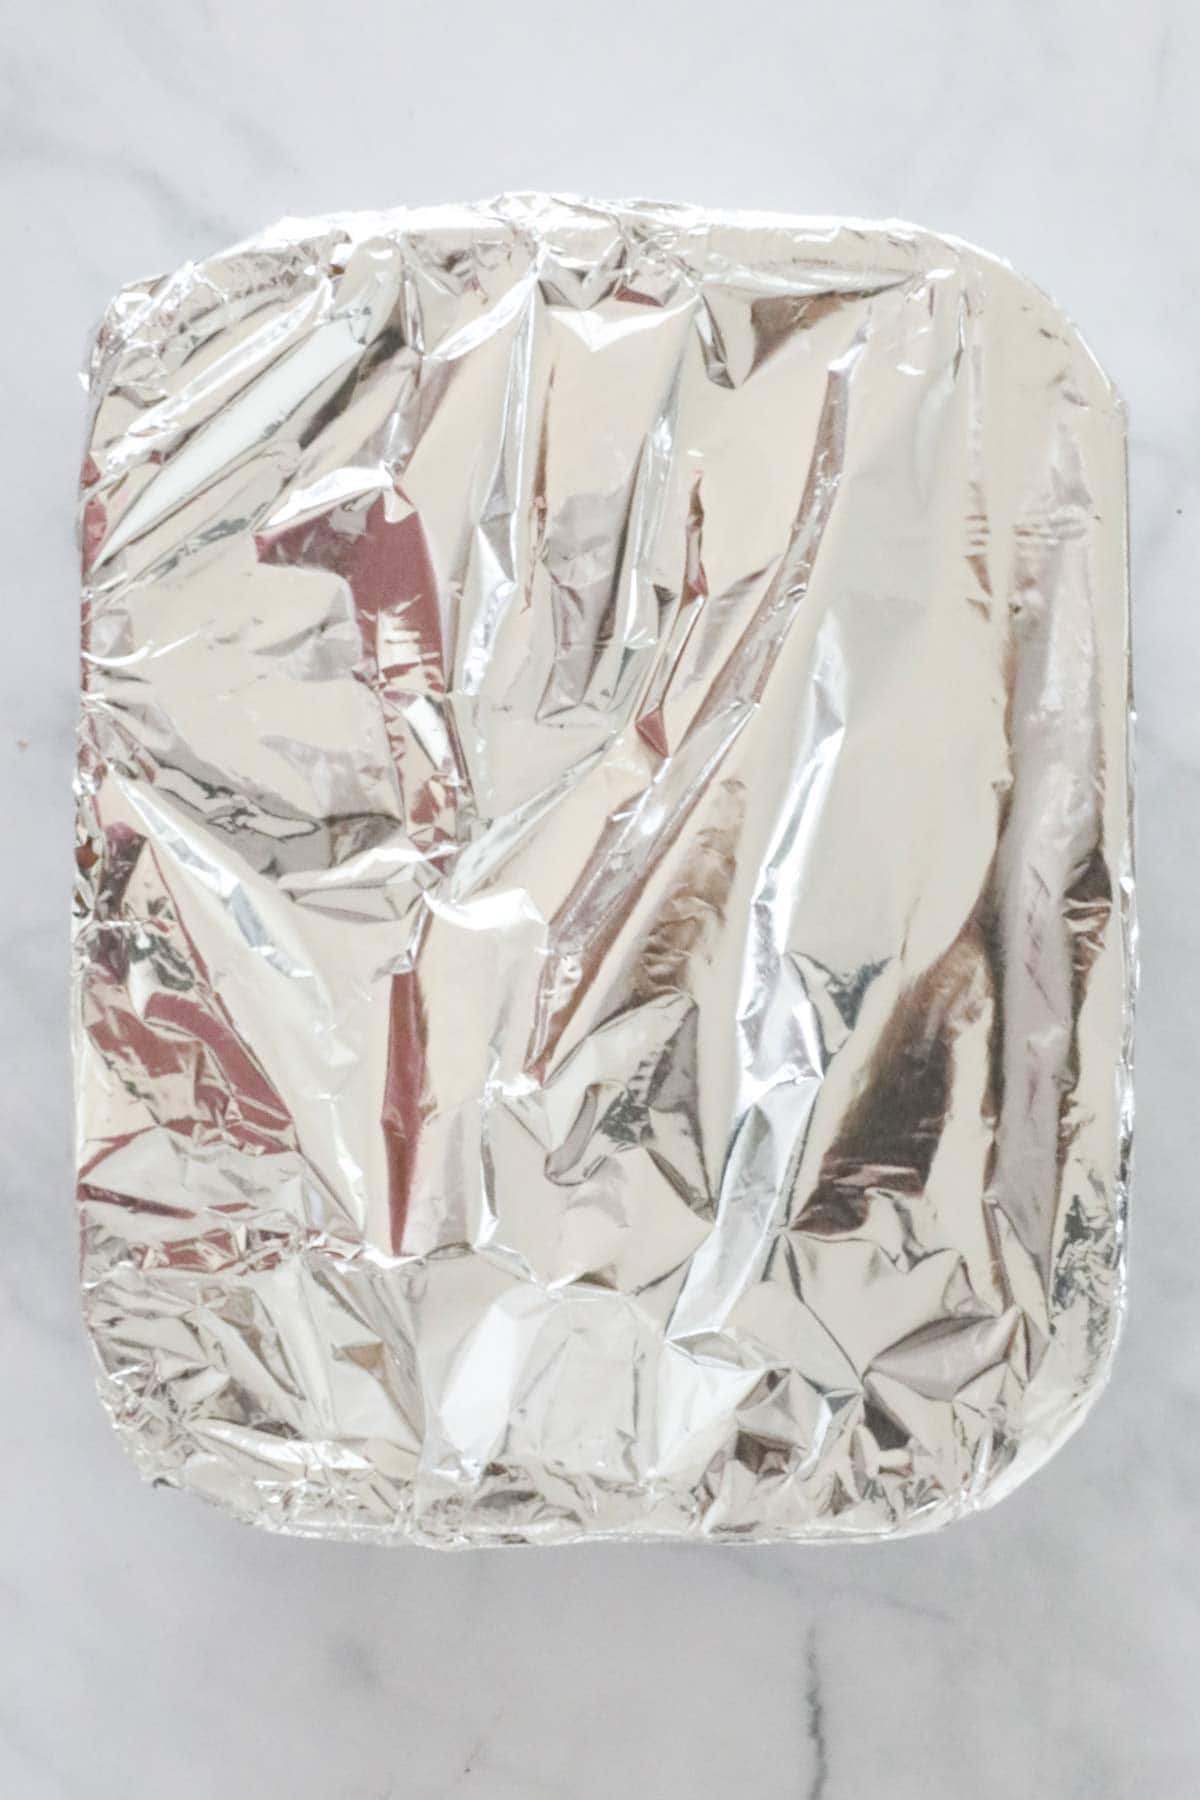 Foil placed over the top of baking dish.